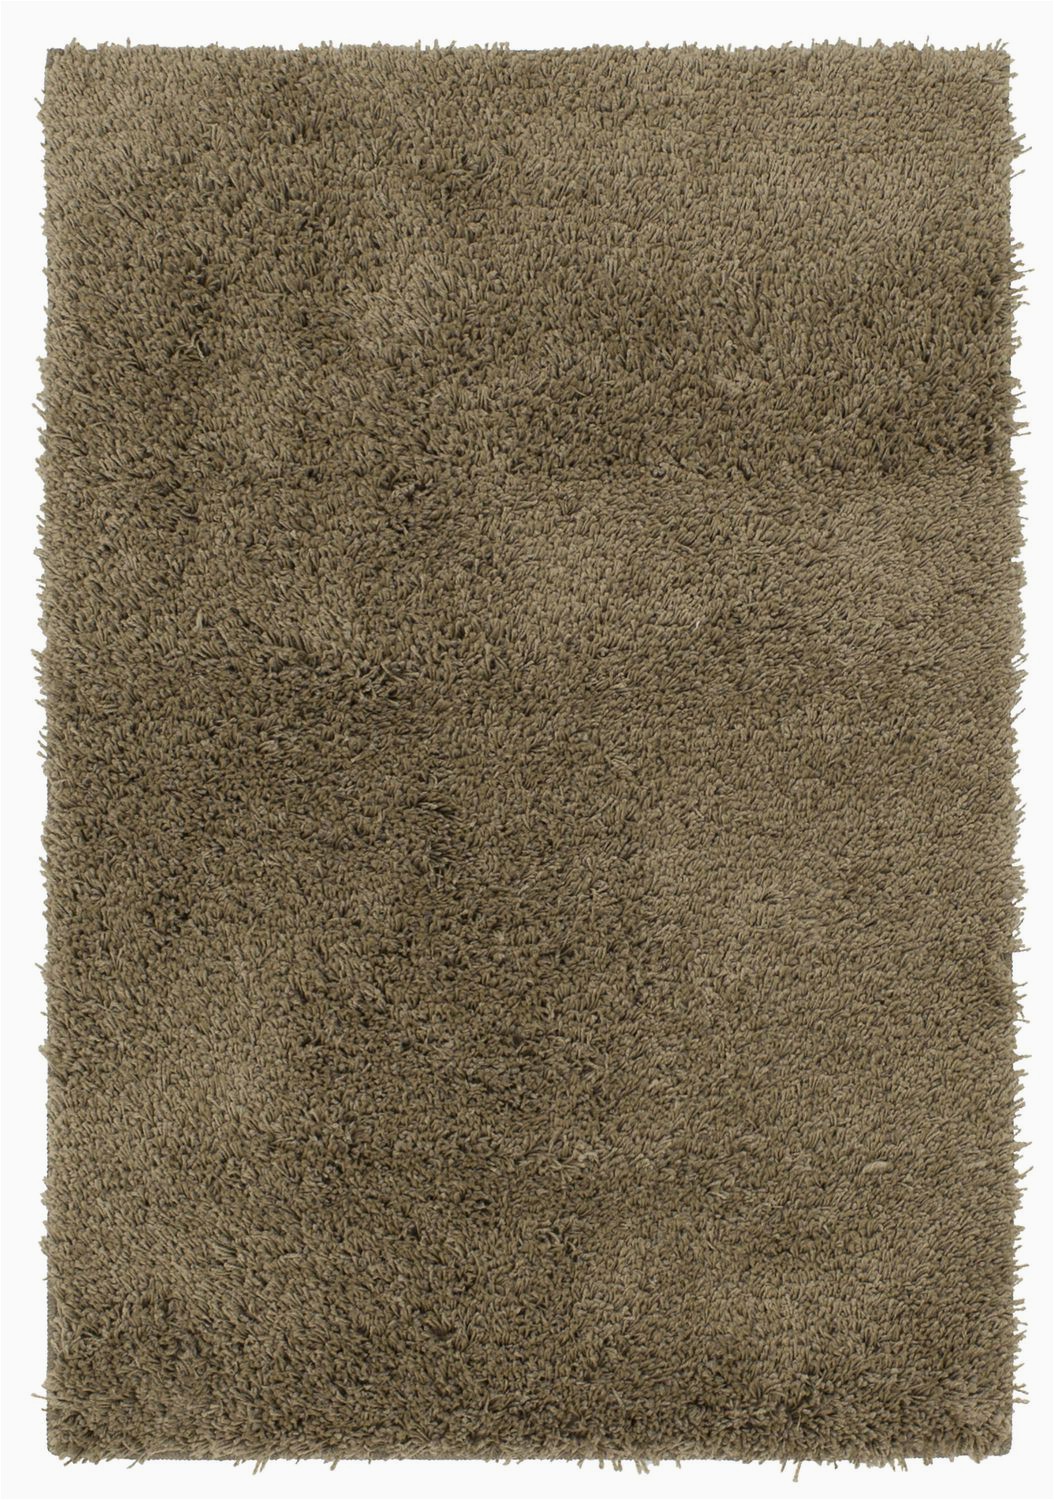 30 X 45 area Rug Hometrends Willow Creek Brown Accent Rug 2 6" X 3 8"